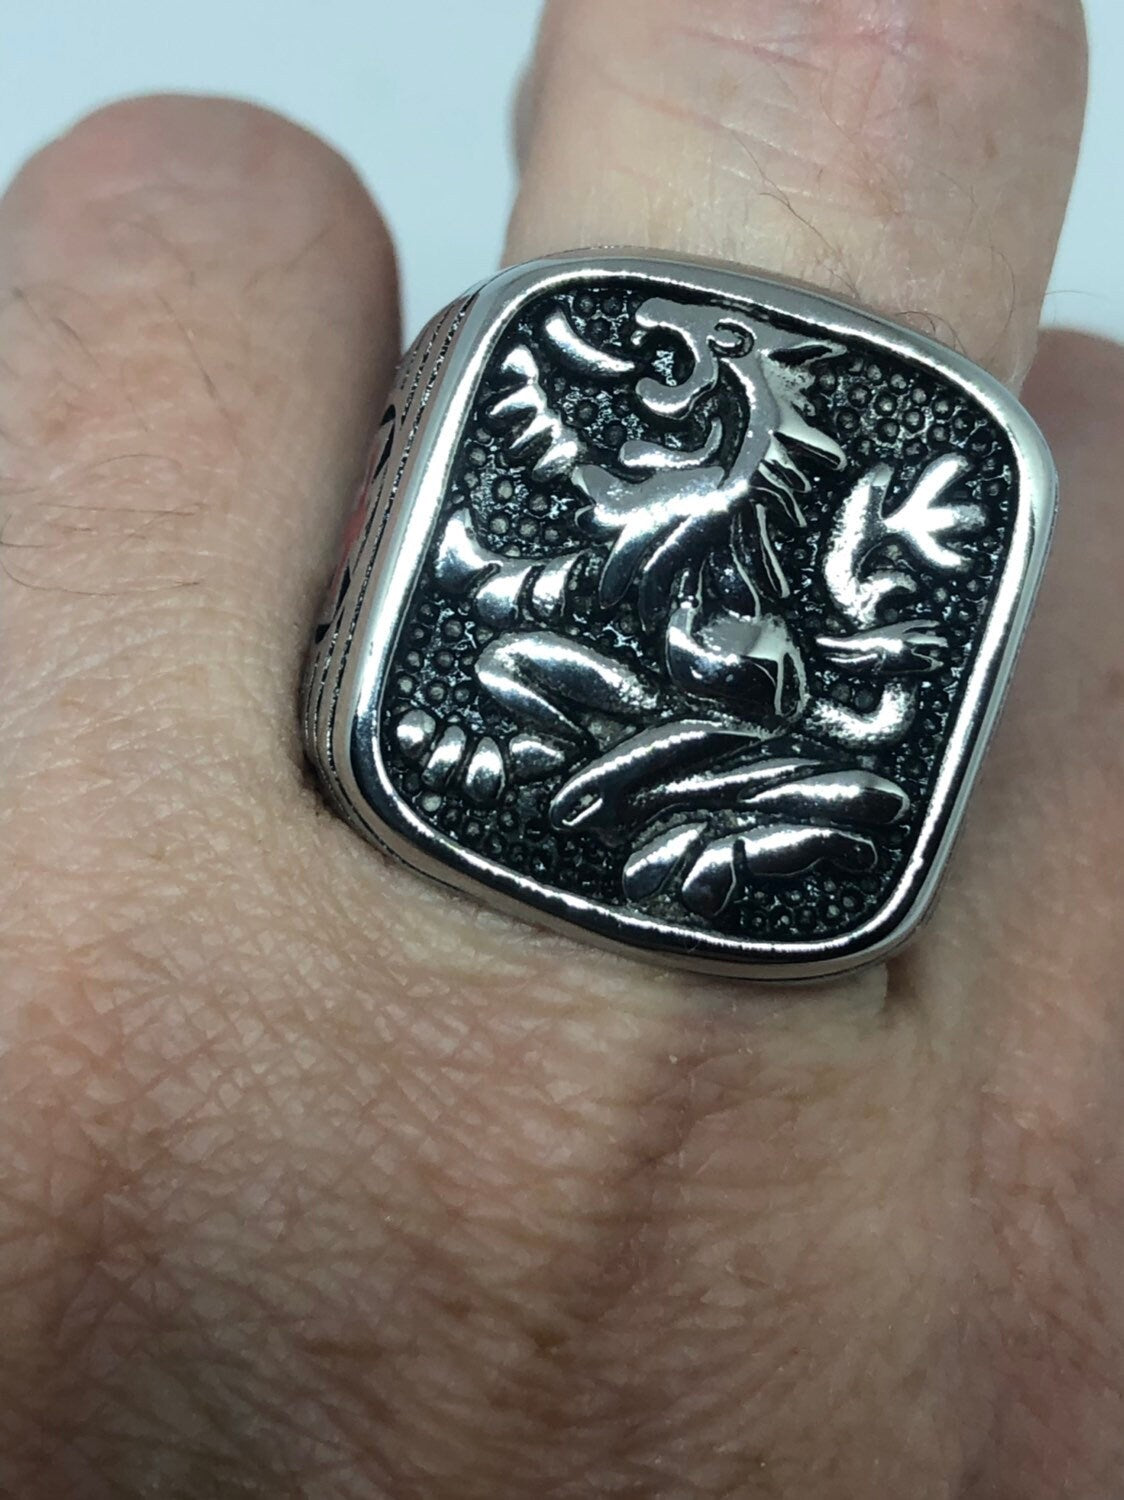 Vintage Gothic Silver Stainless Steel Lion Head Mens Ring